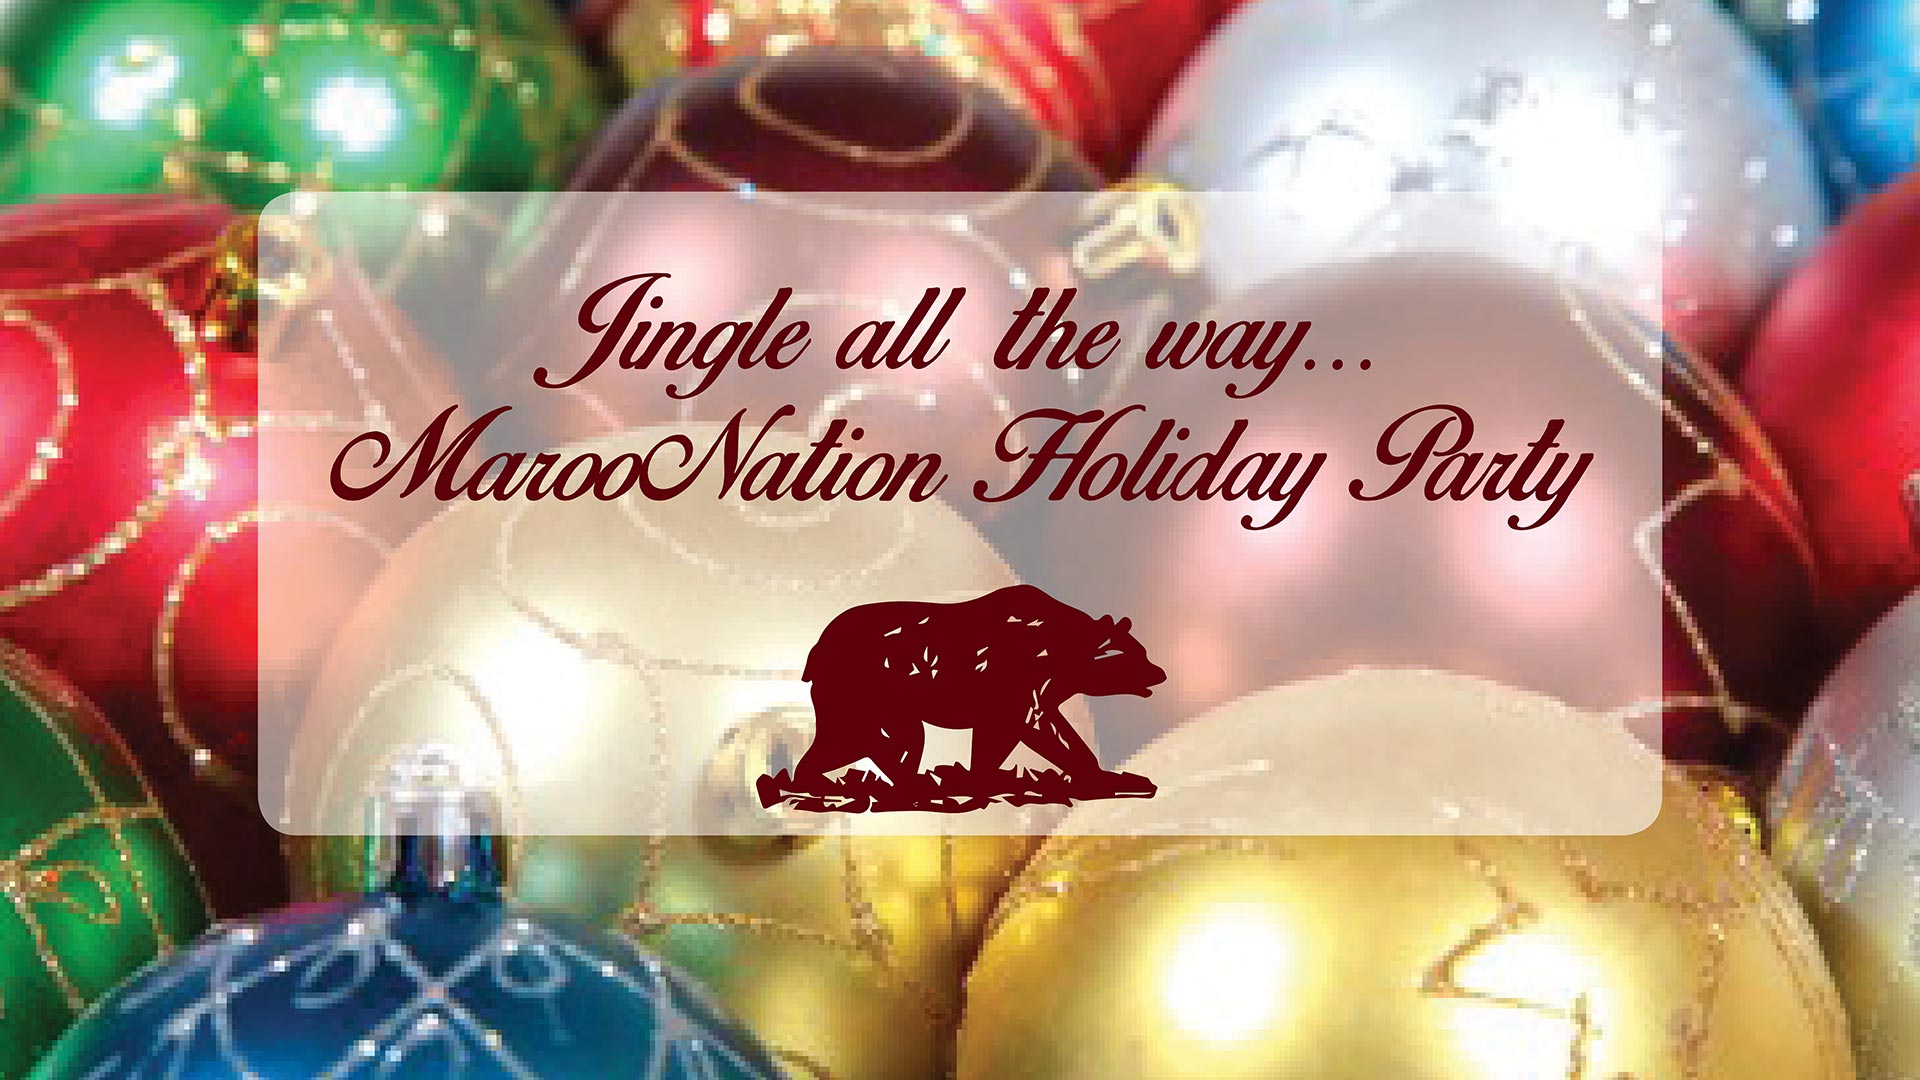 Jingle all the way...MarooNation Holiday Party graphic with ornaments